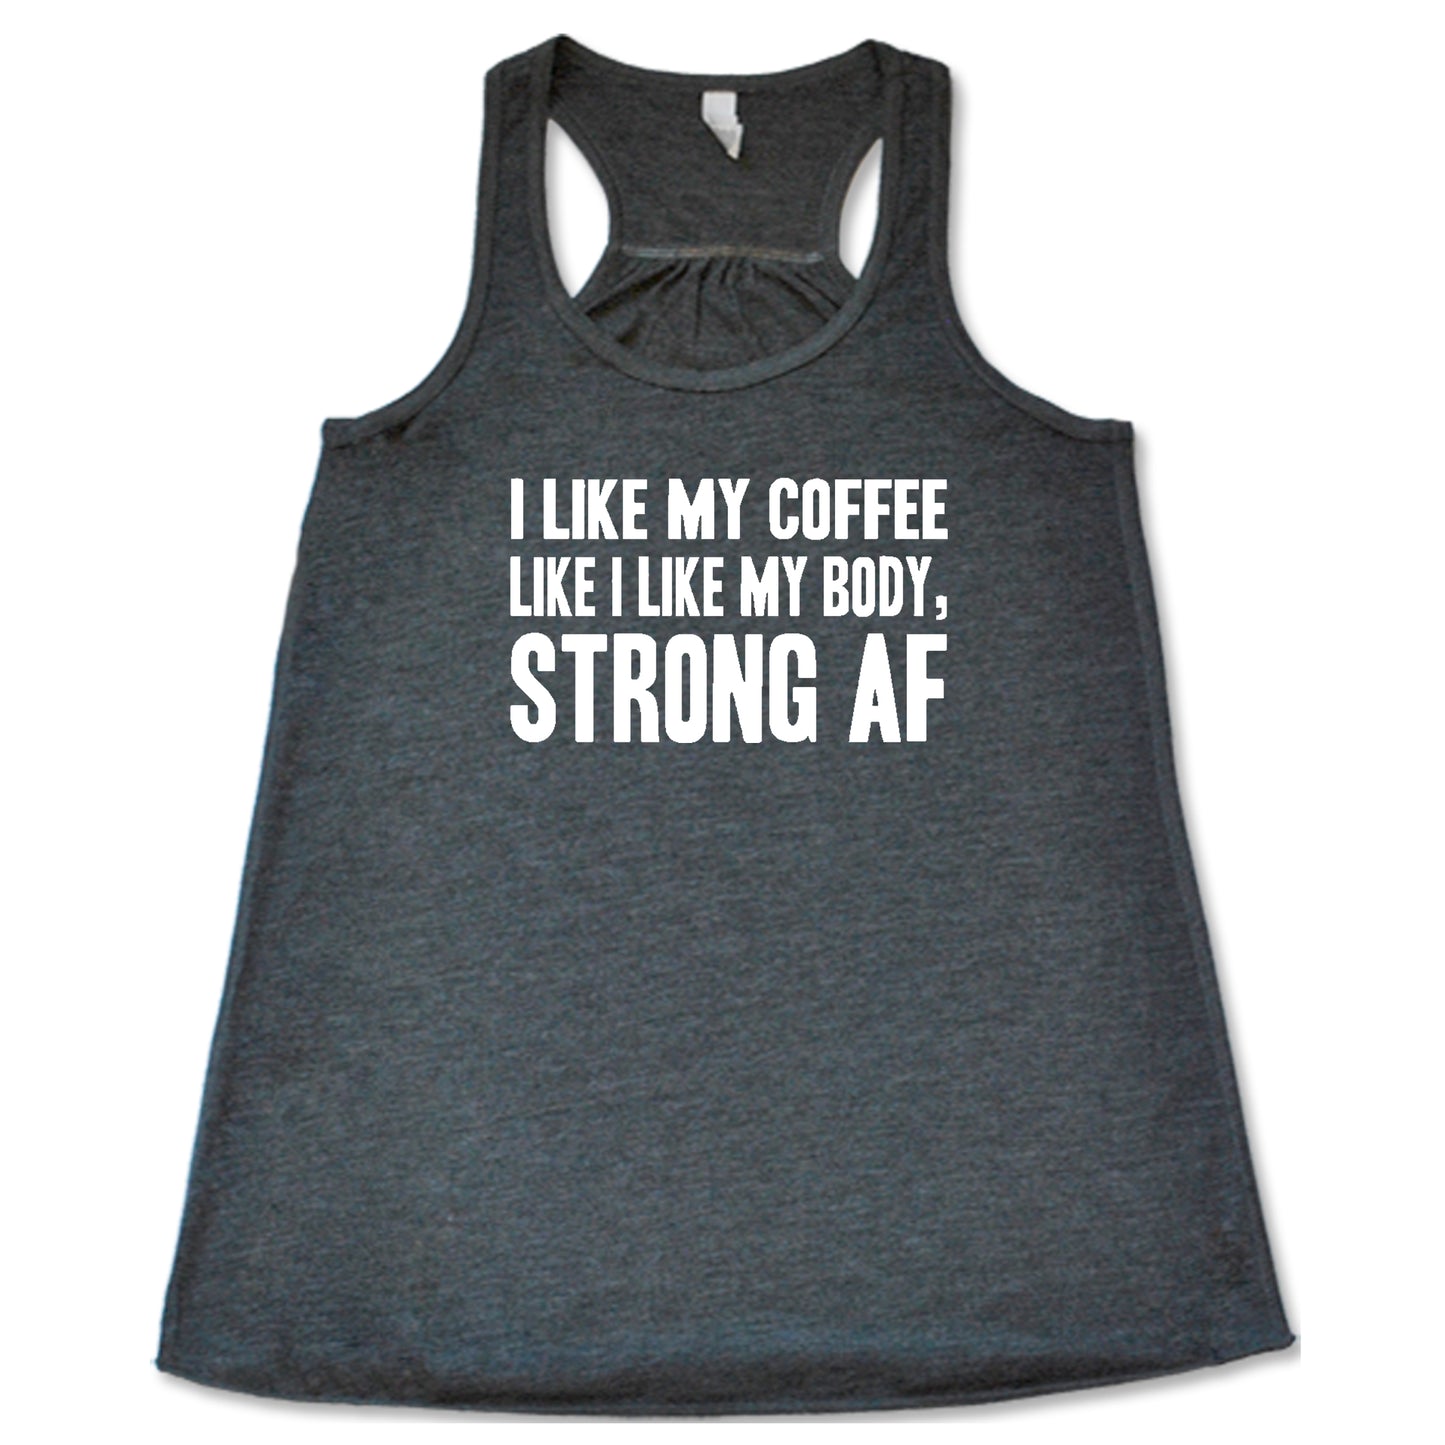 "I Like My Coffee Like I Like My Body Strong AF" quote in white lettering on grey racerback shirt